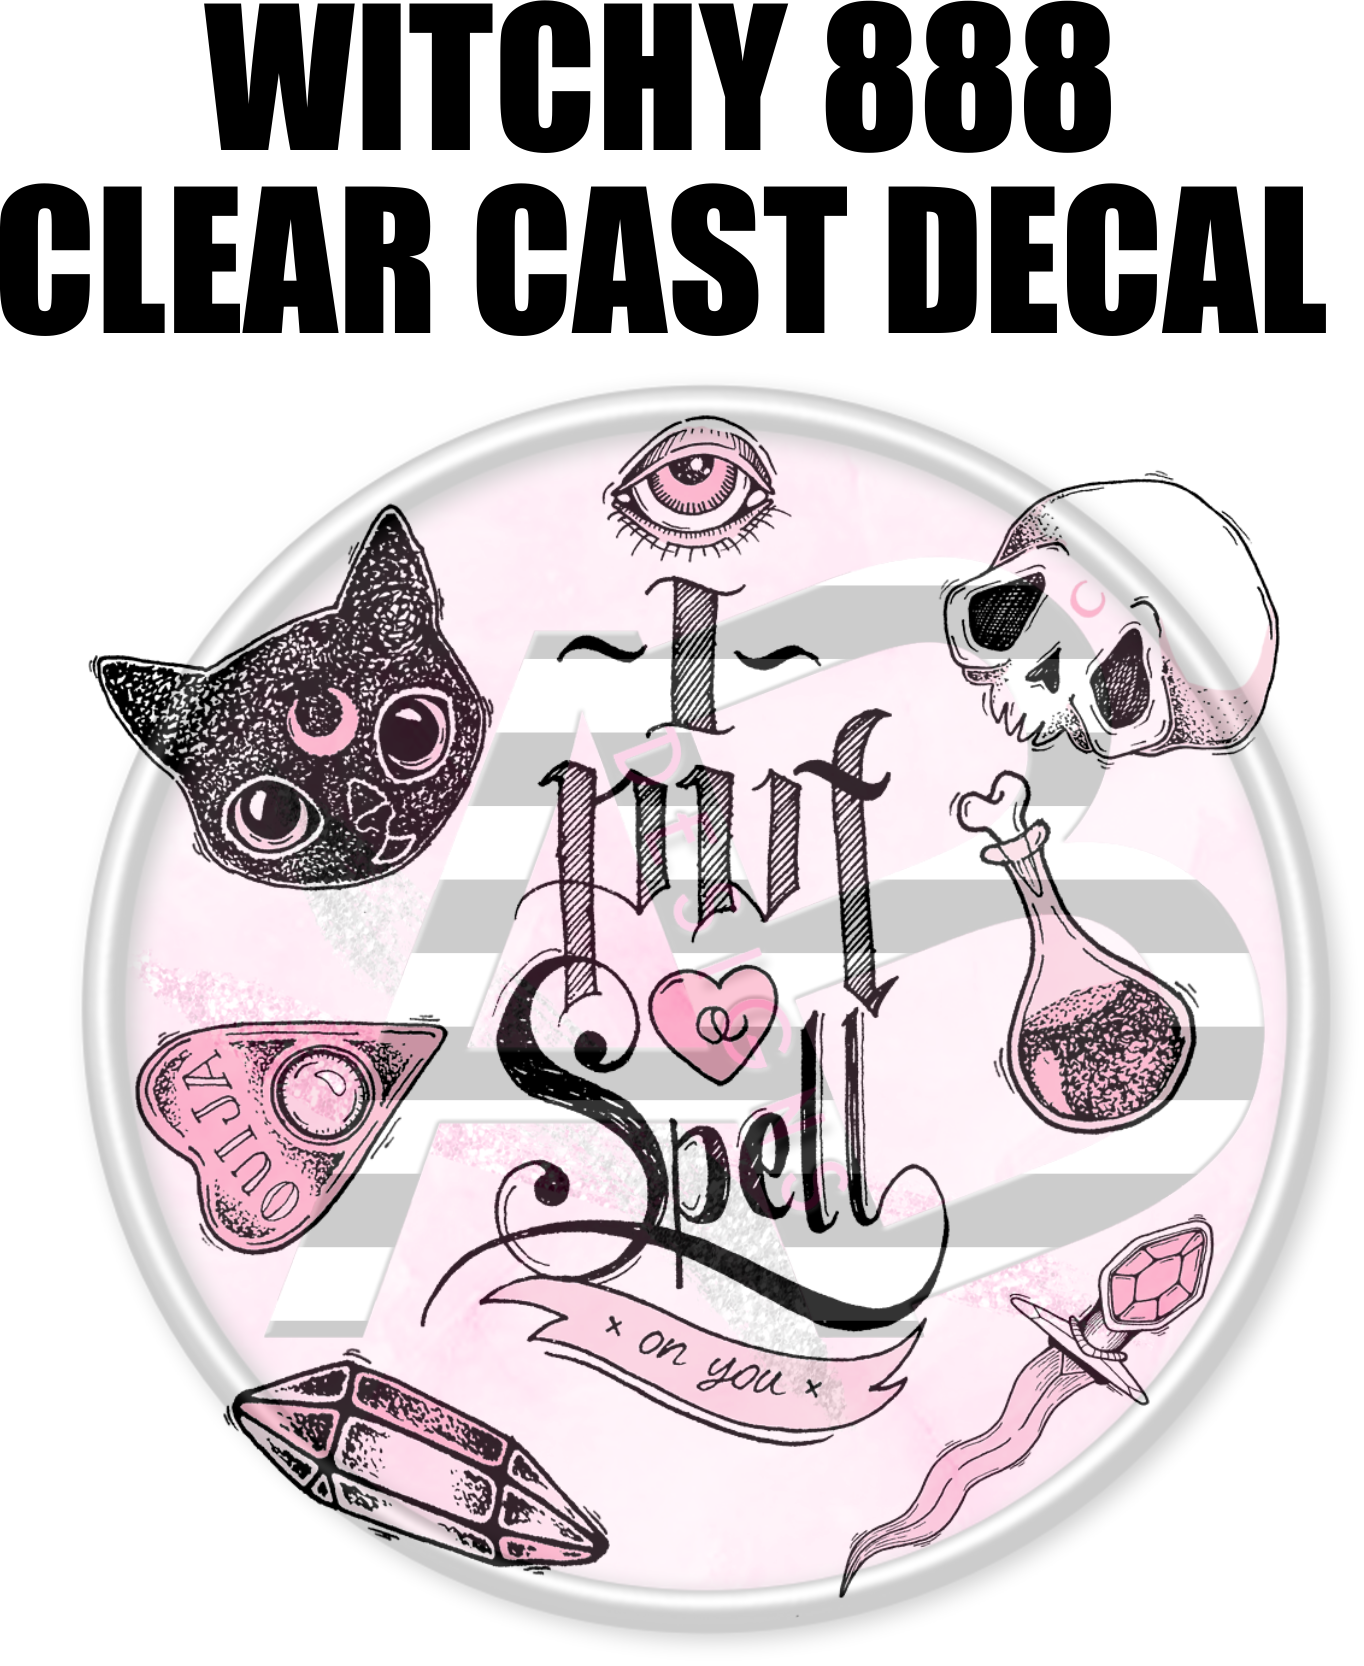 Witchy 888 - Clear Cast Decal